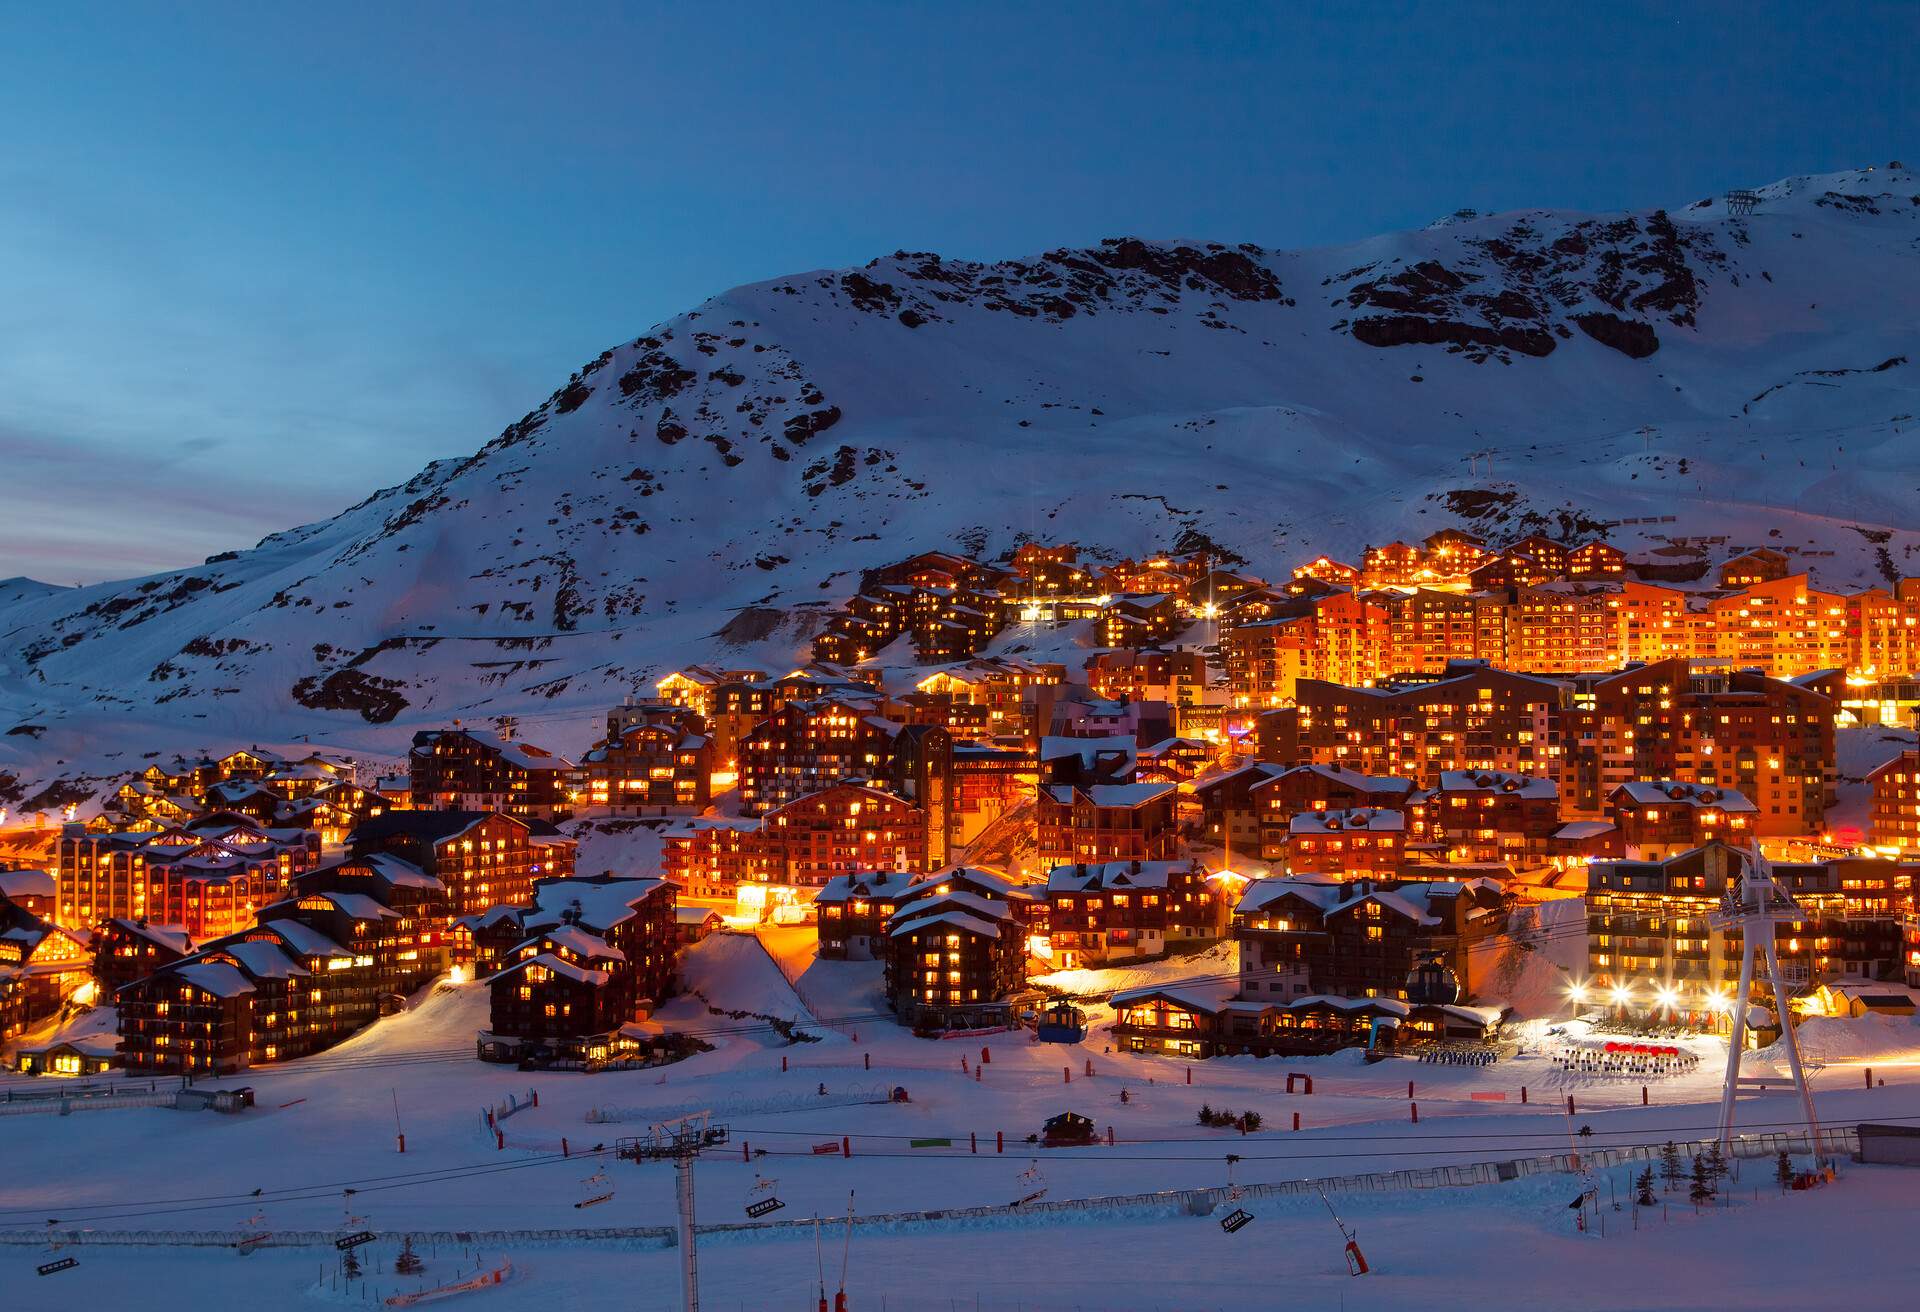 Mountain chalets along the Alps boasting with warm lights in the night.